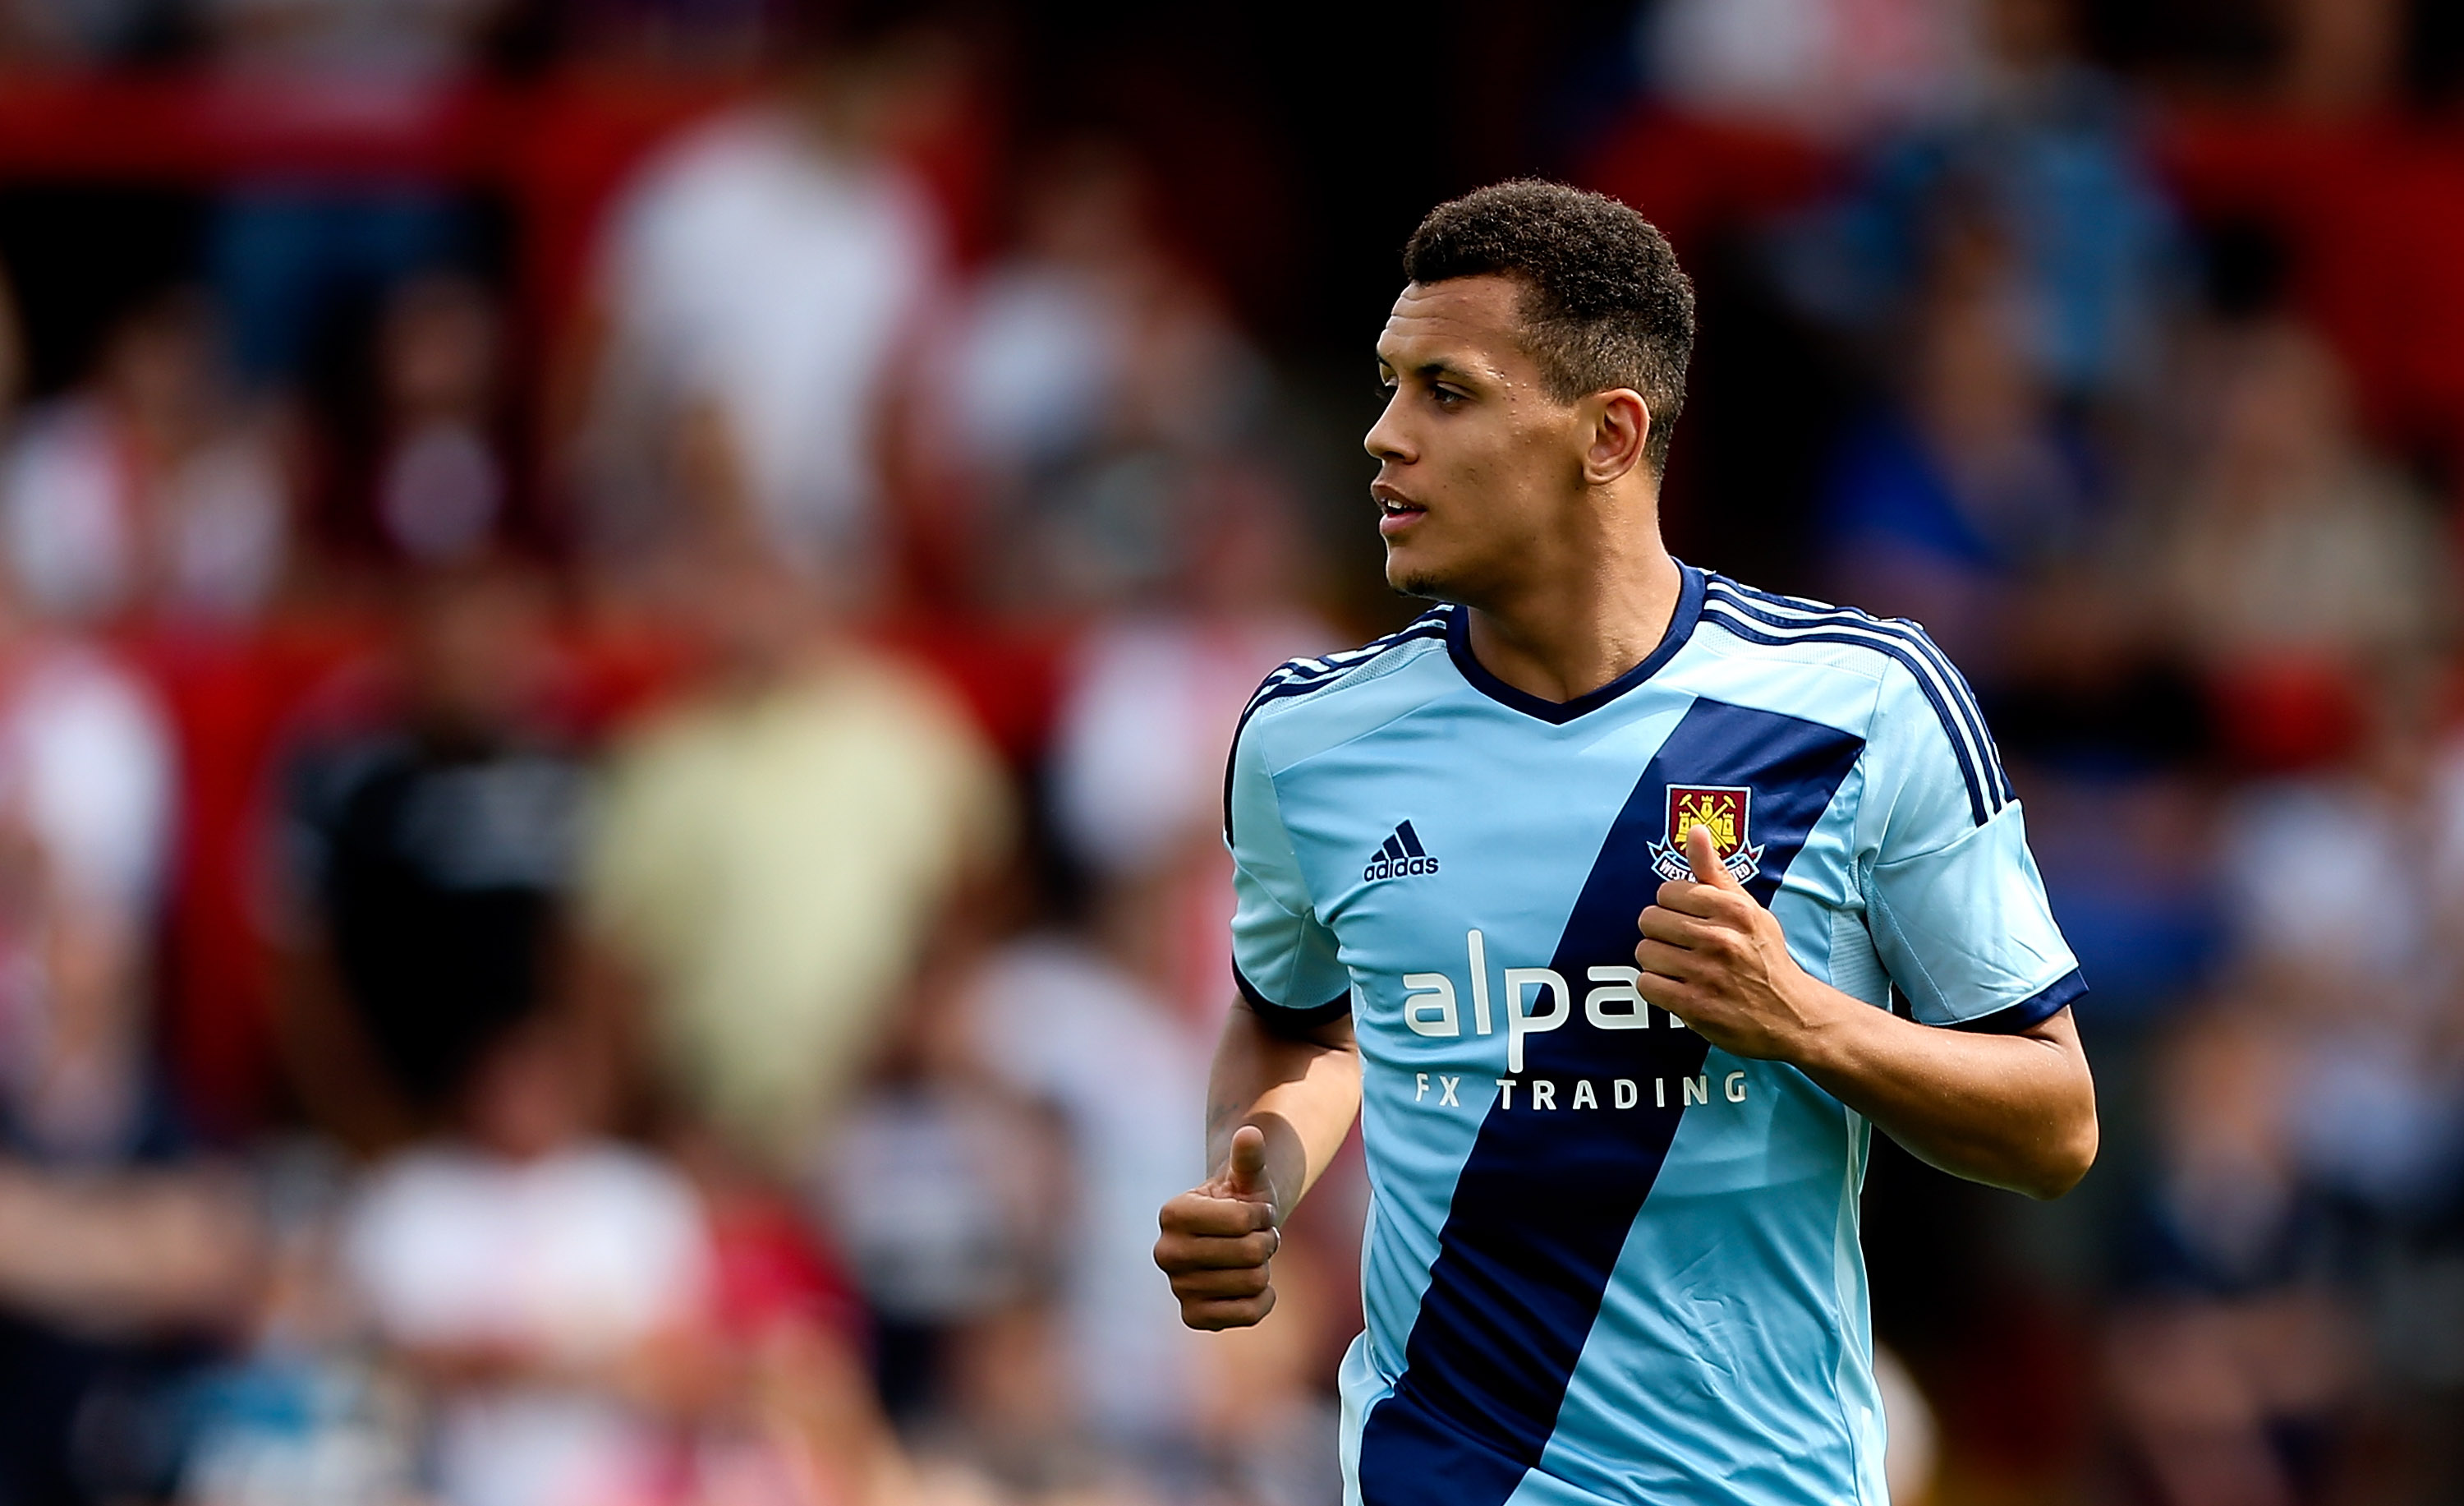 STEVENAGE, ENGLAND - JULY 12: Ravel Morrison of West Ham looks on during the Pre Season Friendly match between Stevenage and West Ham United at The Lamex Stadium on July 12, 2014 in Stevenage, England.  (Photo by Ben Hoskins/Getty Images)